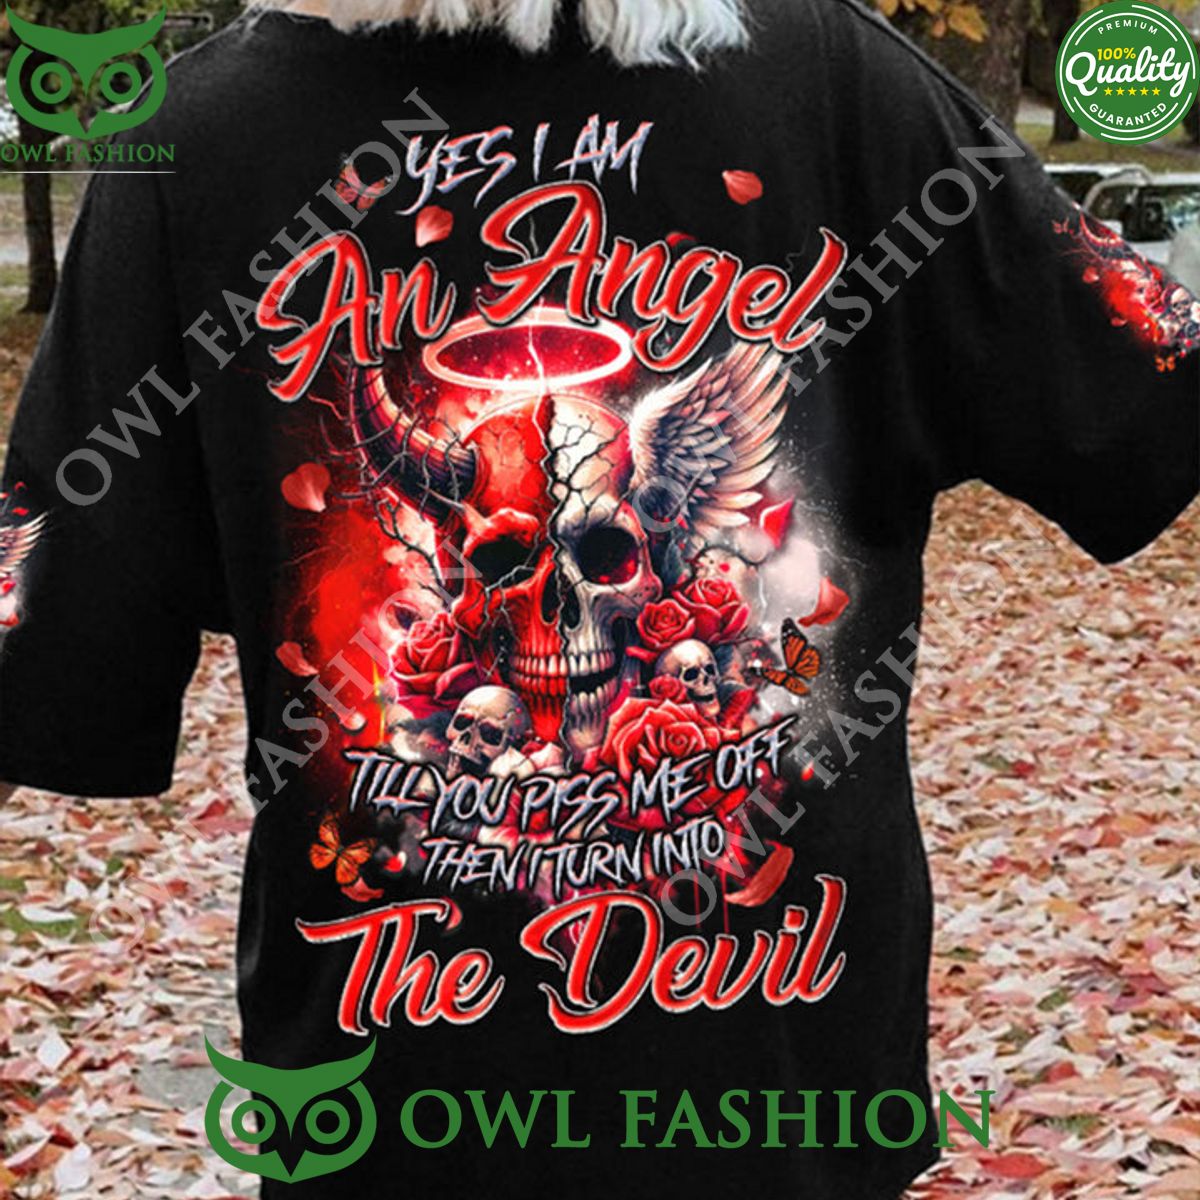 i am an angel till you piss me off then i turn into the devil t shirt 1 a5r3e.jpg